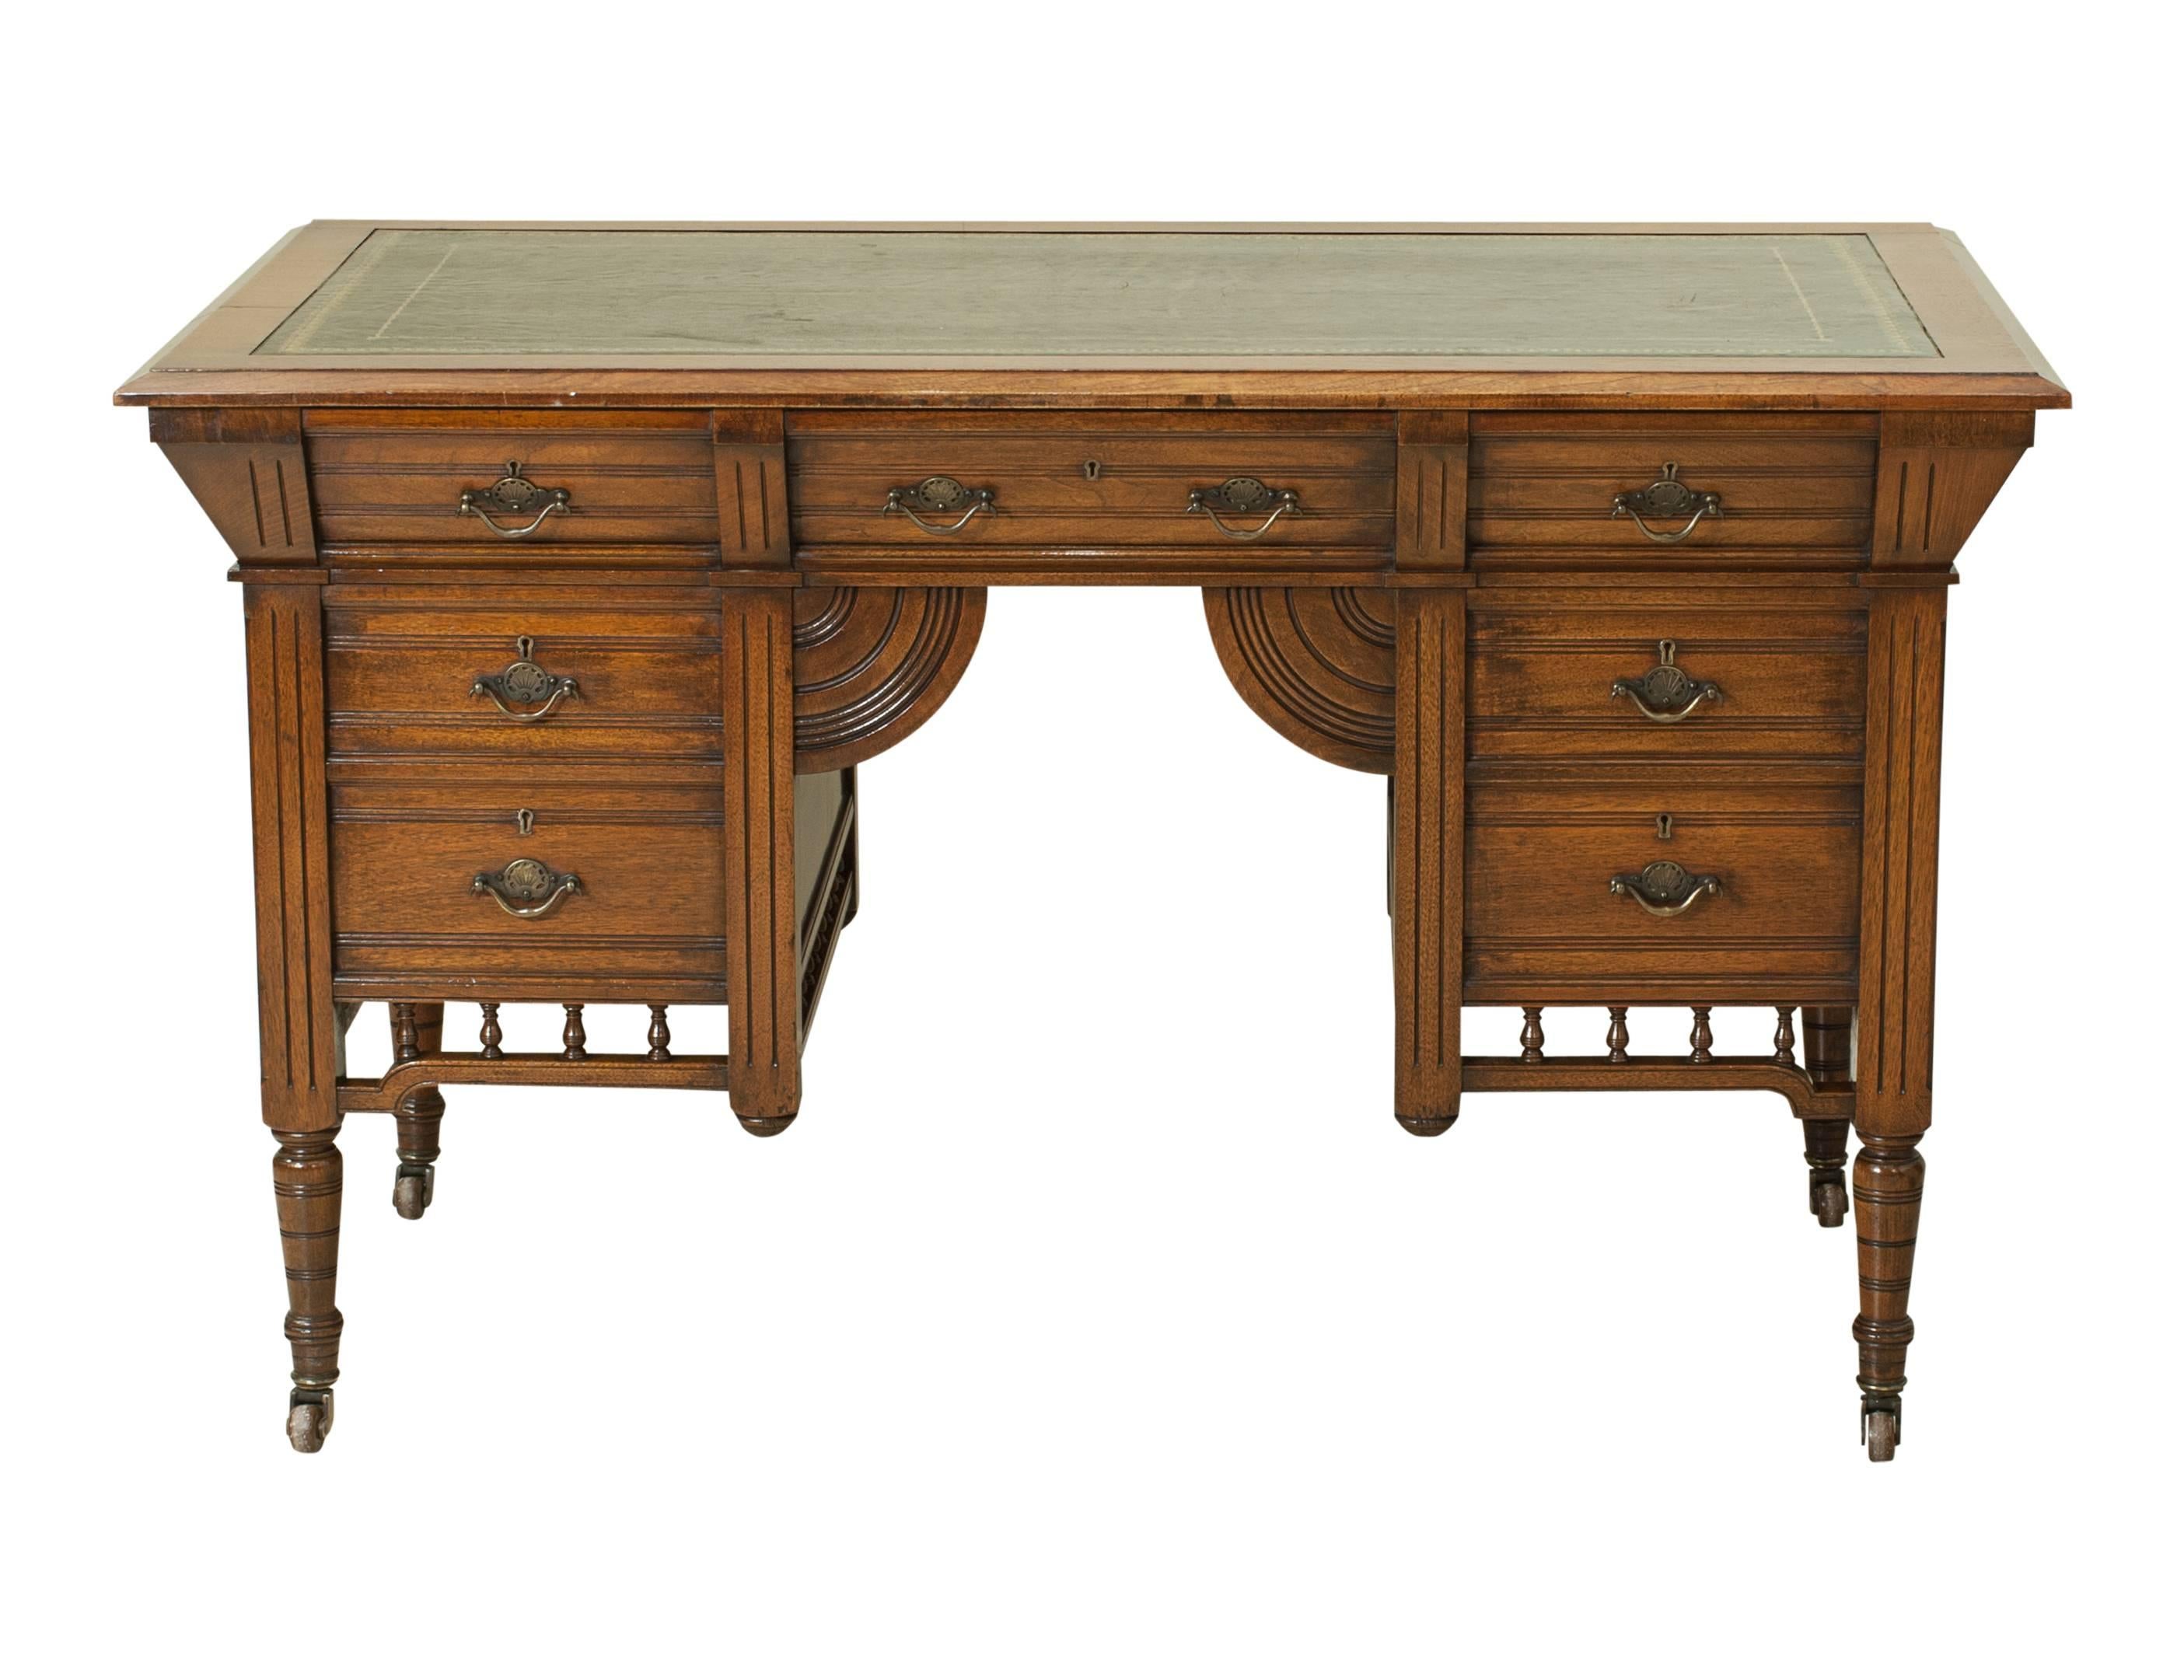 Small walnut partners desk.
A fine Victorian free standing walnut partners desk made in the Channel Islands by Lovell & COX. The desk with a green inset leather top with gilt tooling, one side with dummy drawers the other with a total of seven